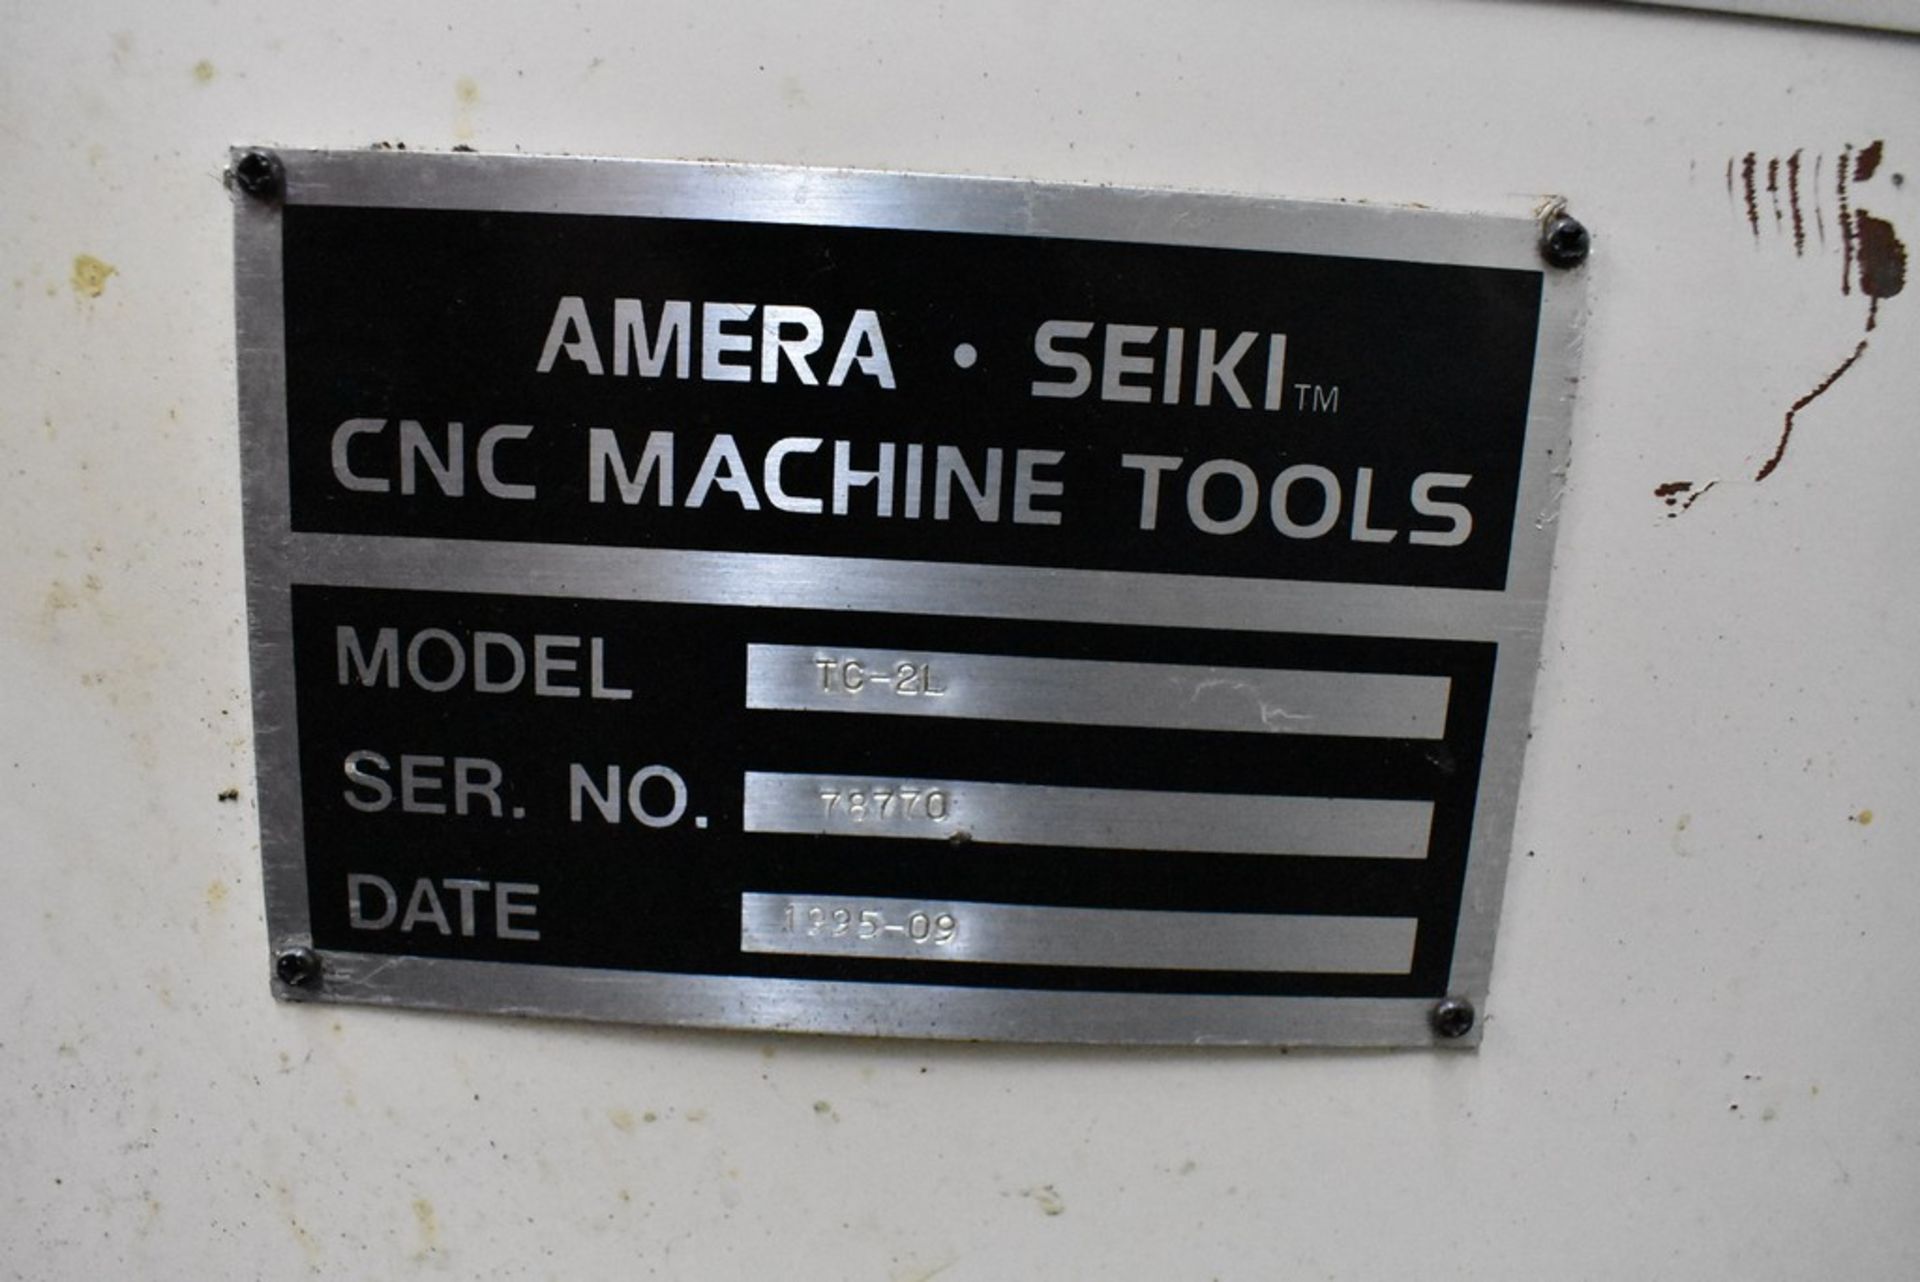 AMERA-SEIKI MODEL TC-2L CNC TURNING CENTER, S/N 78770, WITH CHUCK, TAILSTOCK, FANUC SERIES O-T - Image 17 of 17